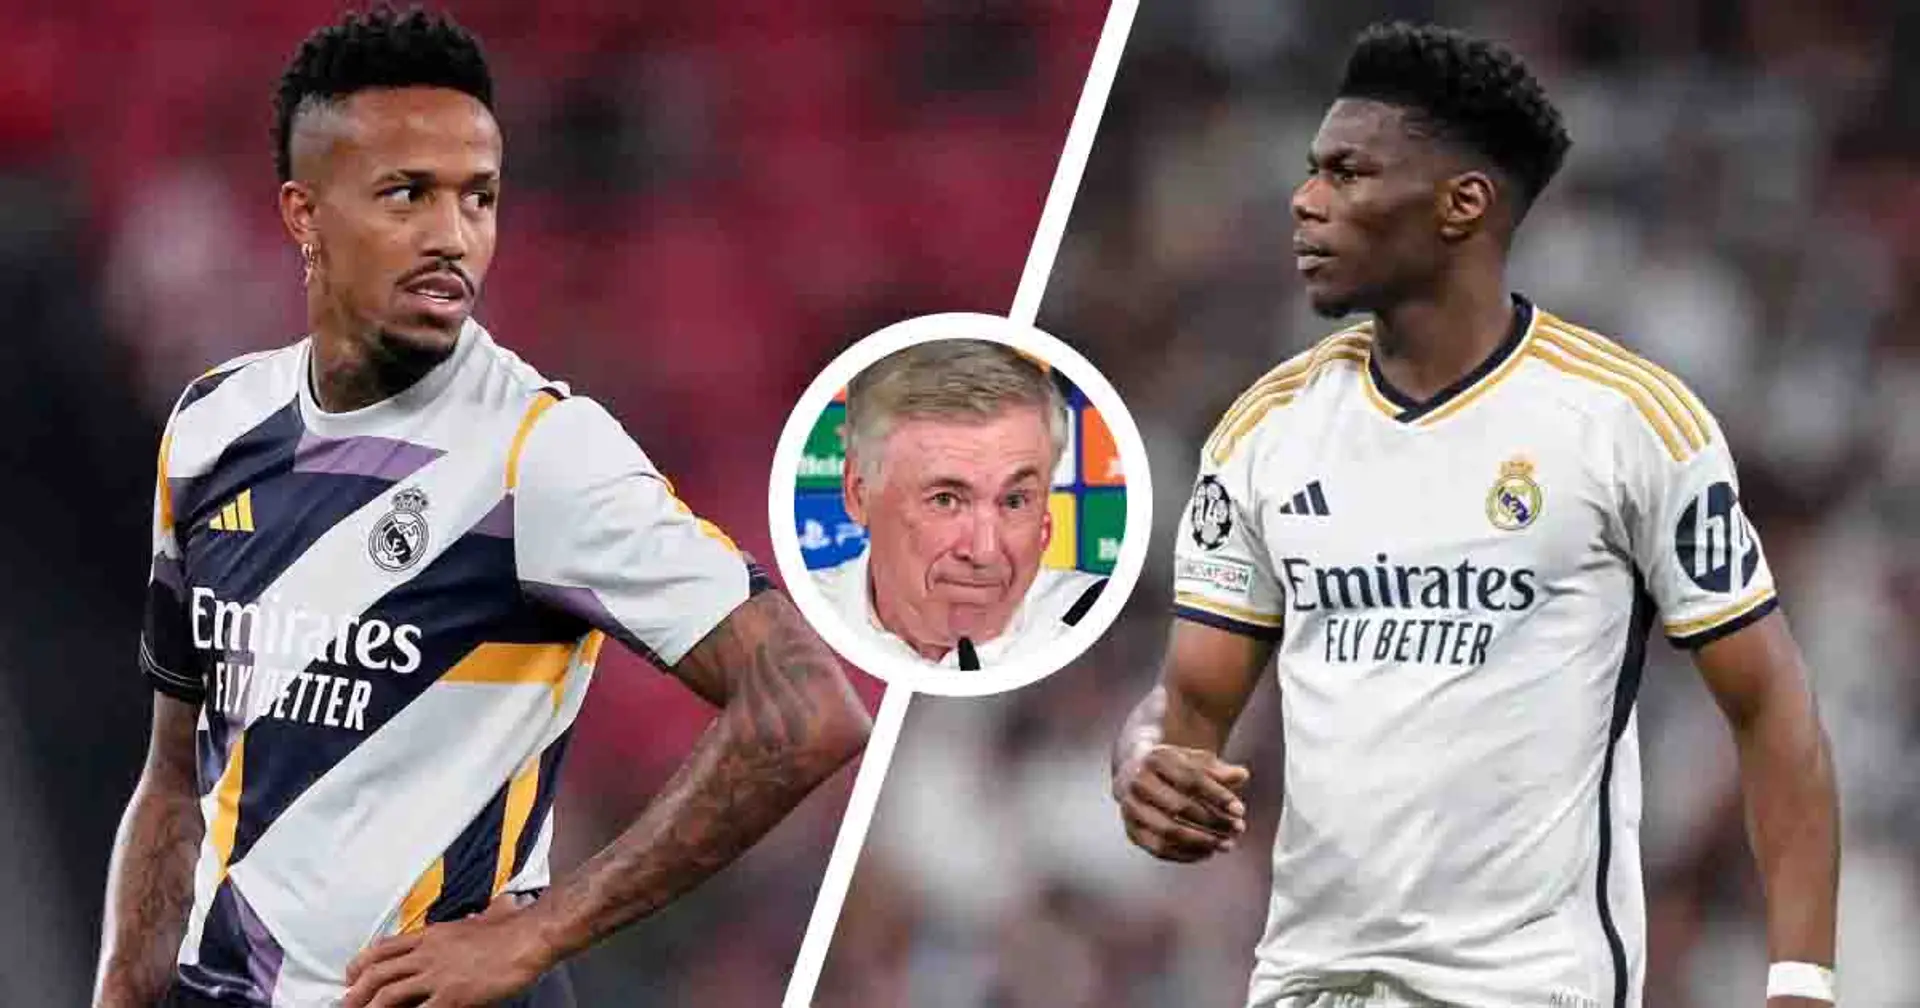 Will Militao and Tchouameni be ready to start UCL final? Ancelotti provides latest update